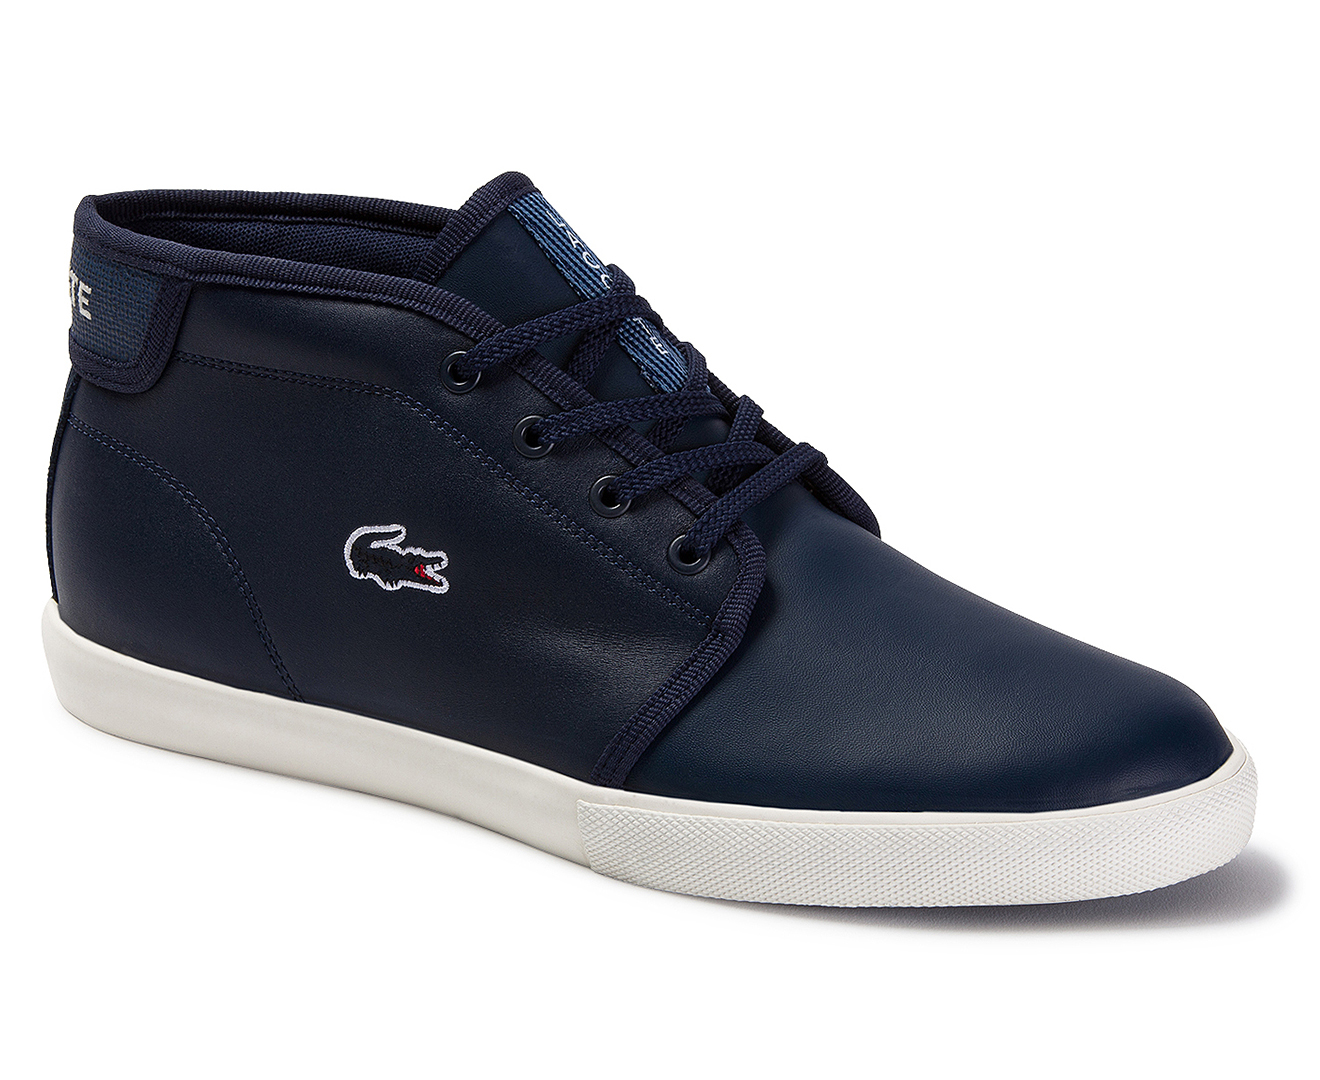 Lacoste Men's Ampthill 120 2 Sneakers - Navy/Off White | Catch.co.nz